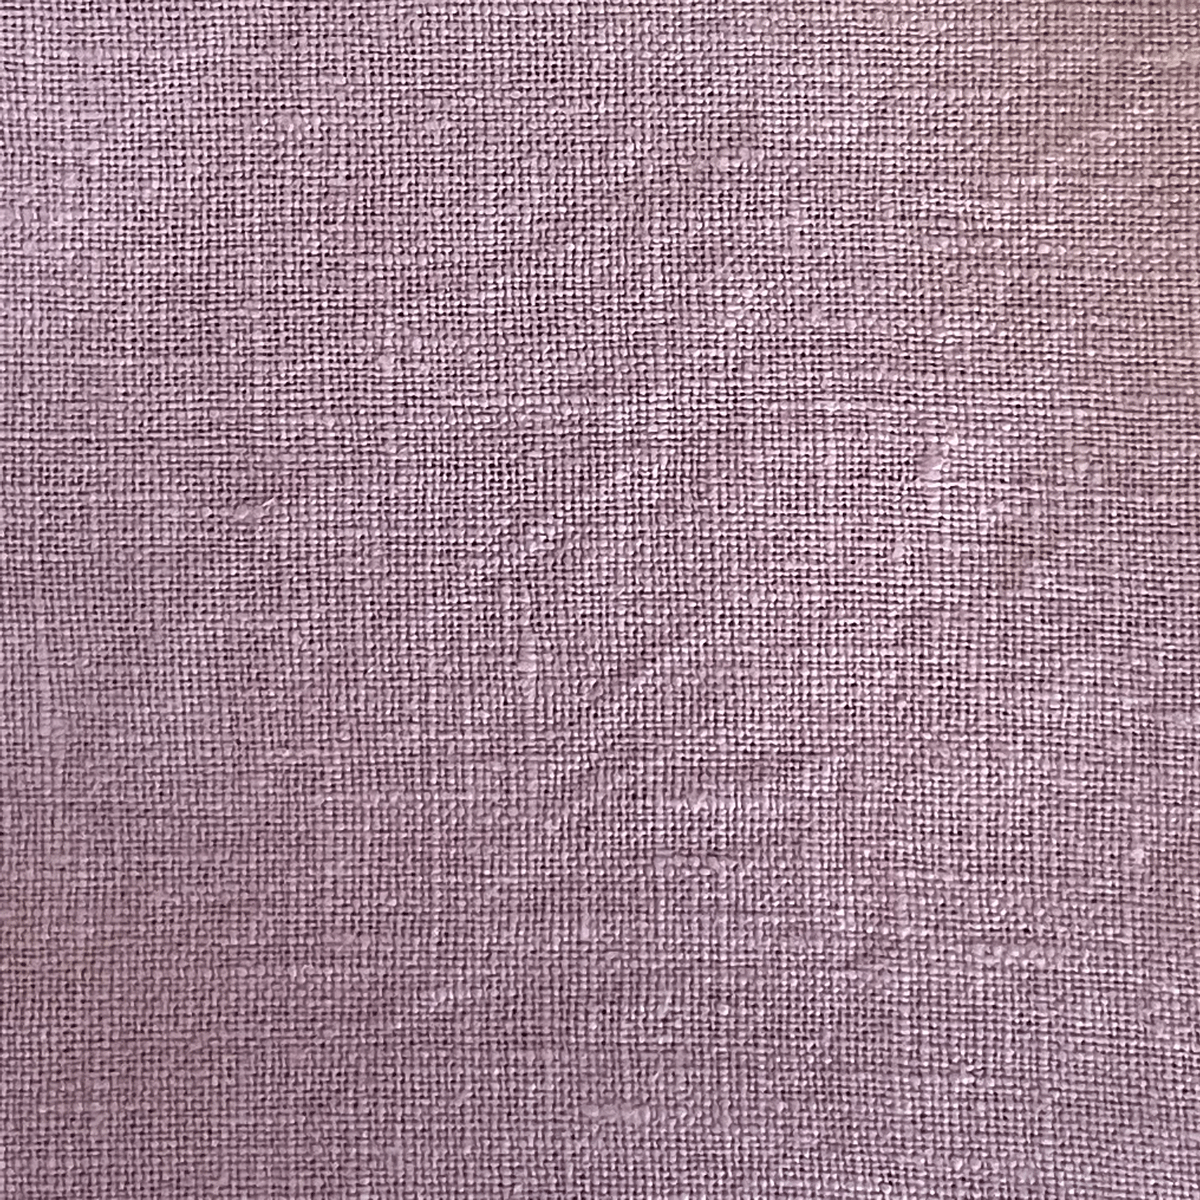 www.colourstreams.com.au Colour Streams Linen 36 Count Hand Dyed DL 22 Dusk Purples Embroidery Cross Stitch Textile Arts FIbre Embroidery Slow Stitching Counted Meditative Australia